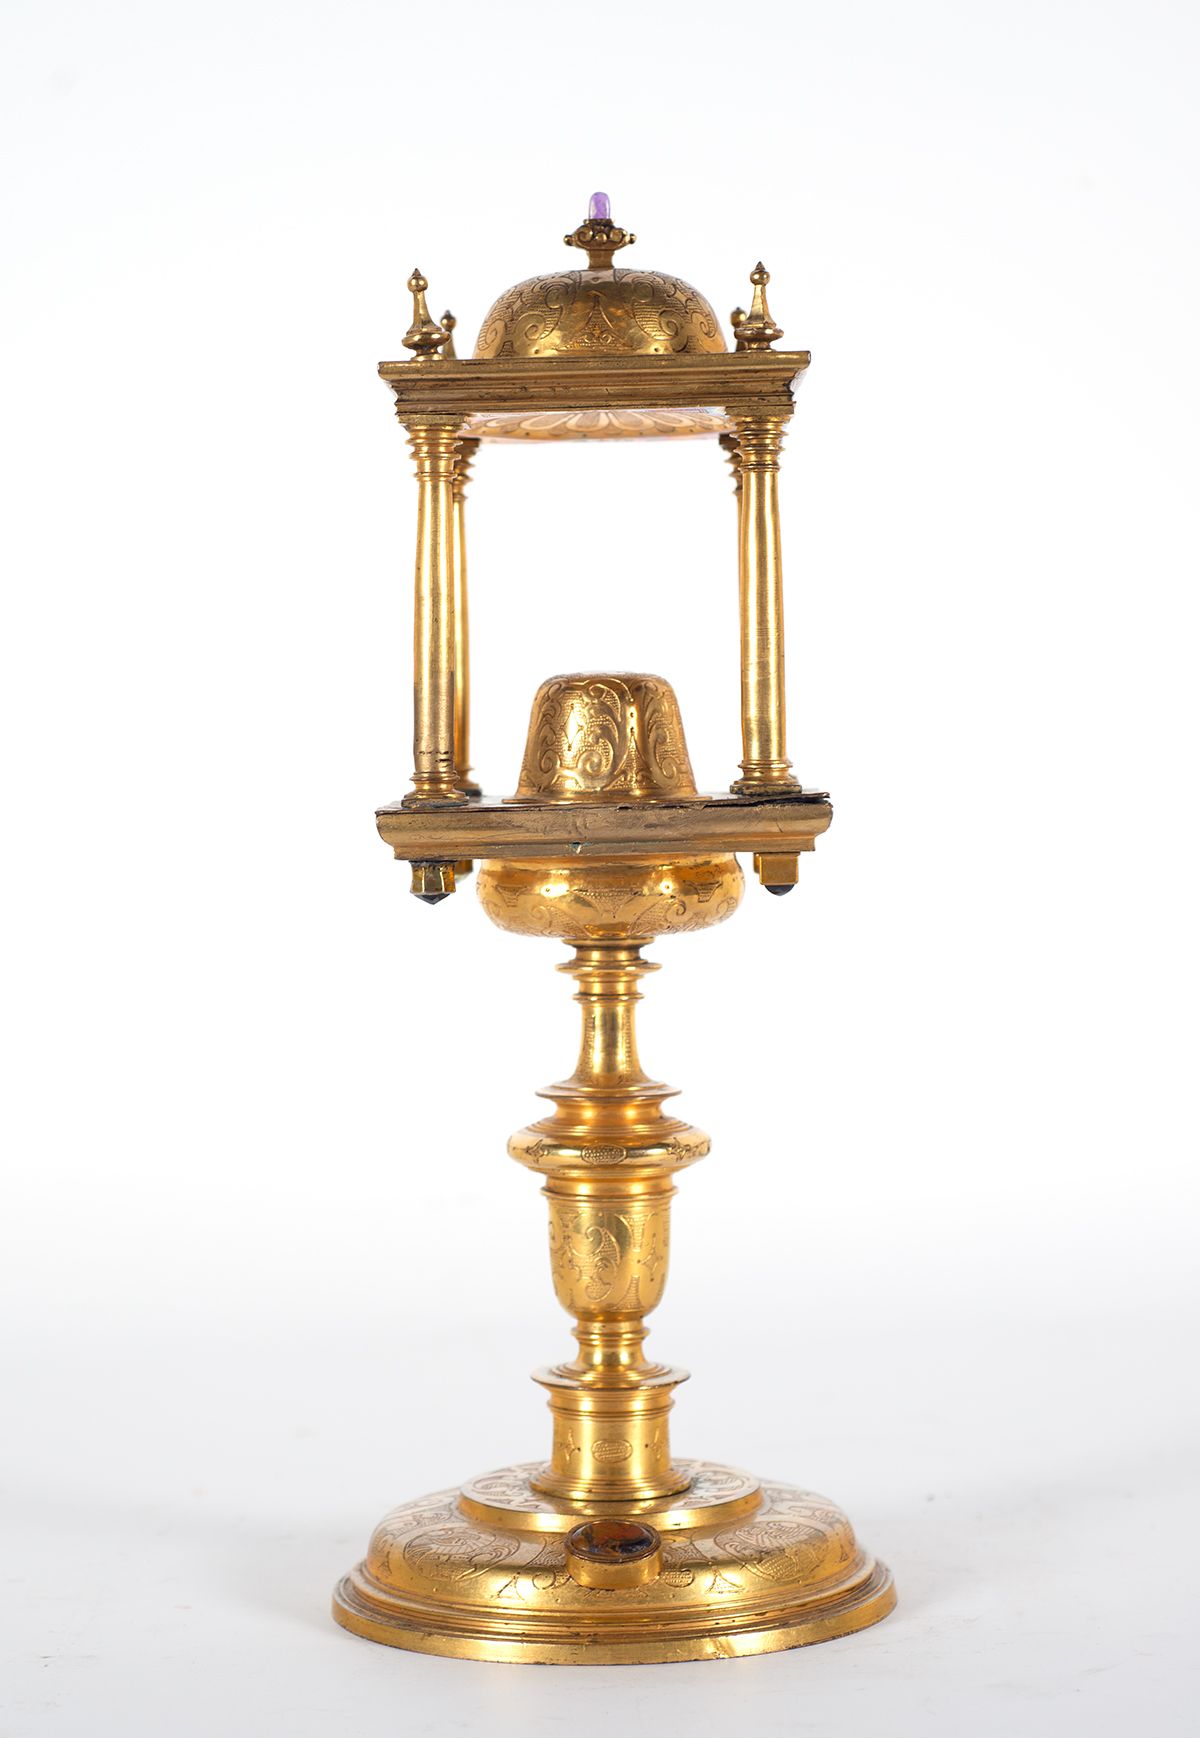 Important monstrance in gilded bronze from the 16th century 尺寸：37 x 11 cm